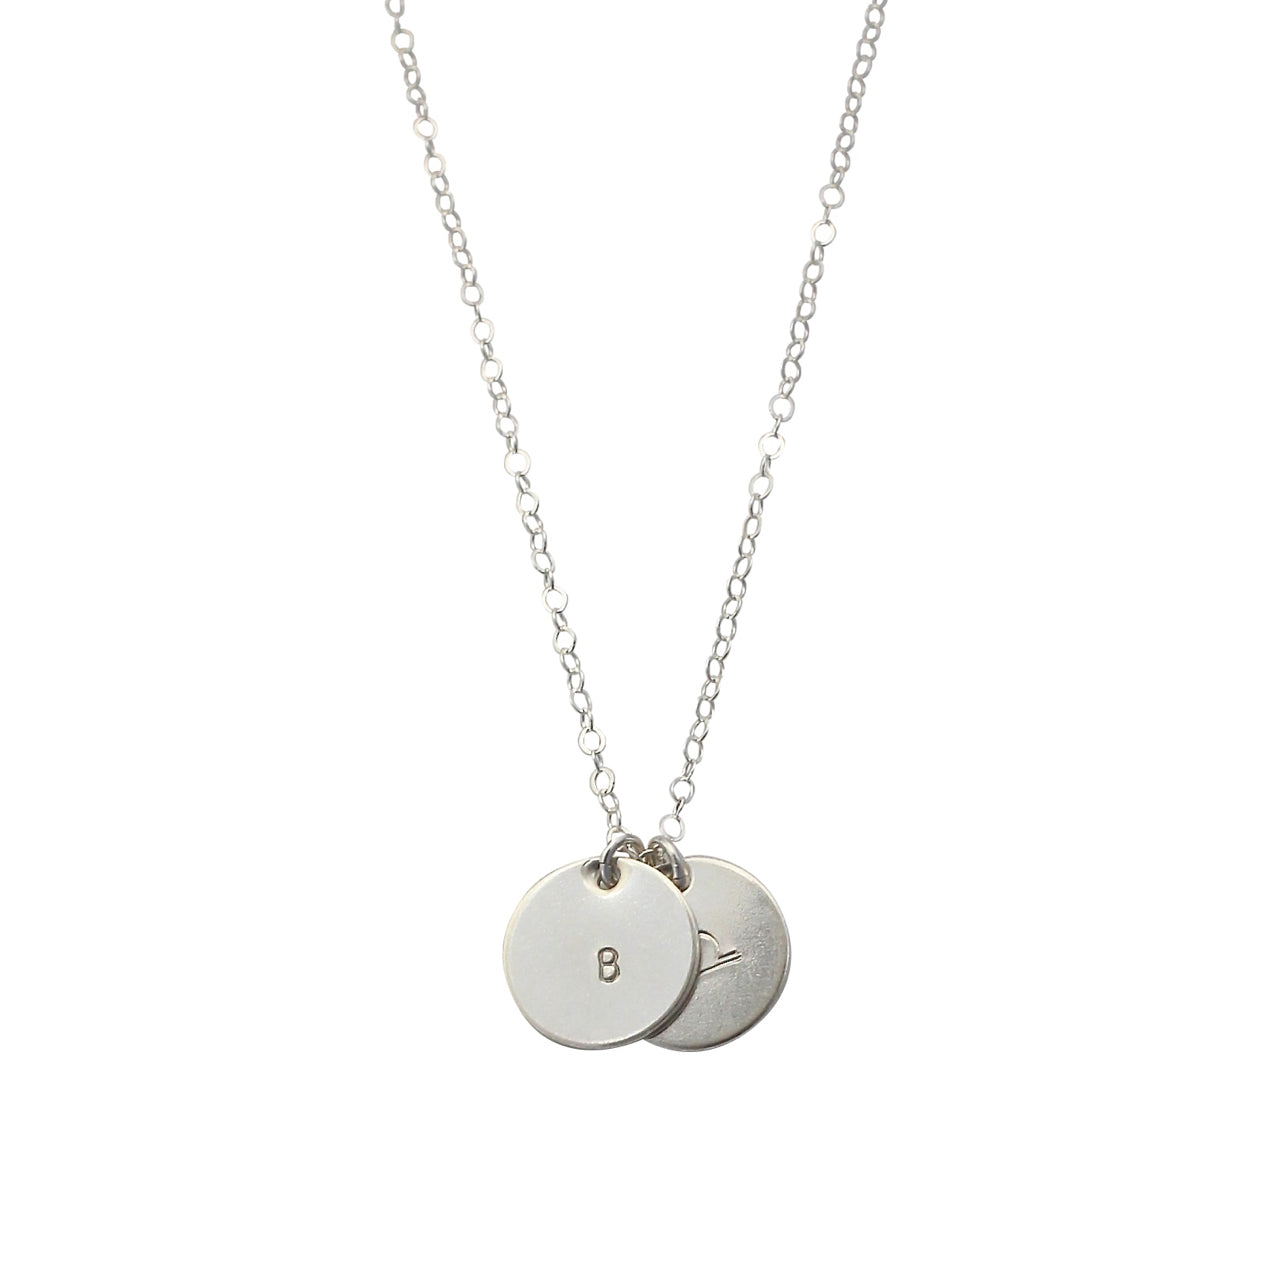 Silver Zodiac Sign necklace with two discs